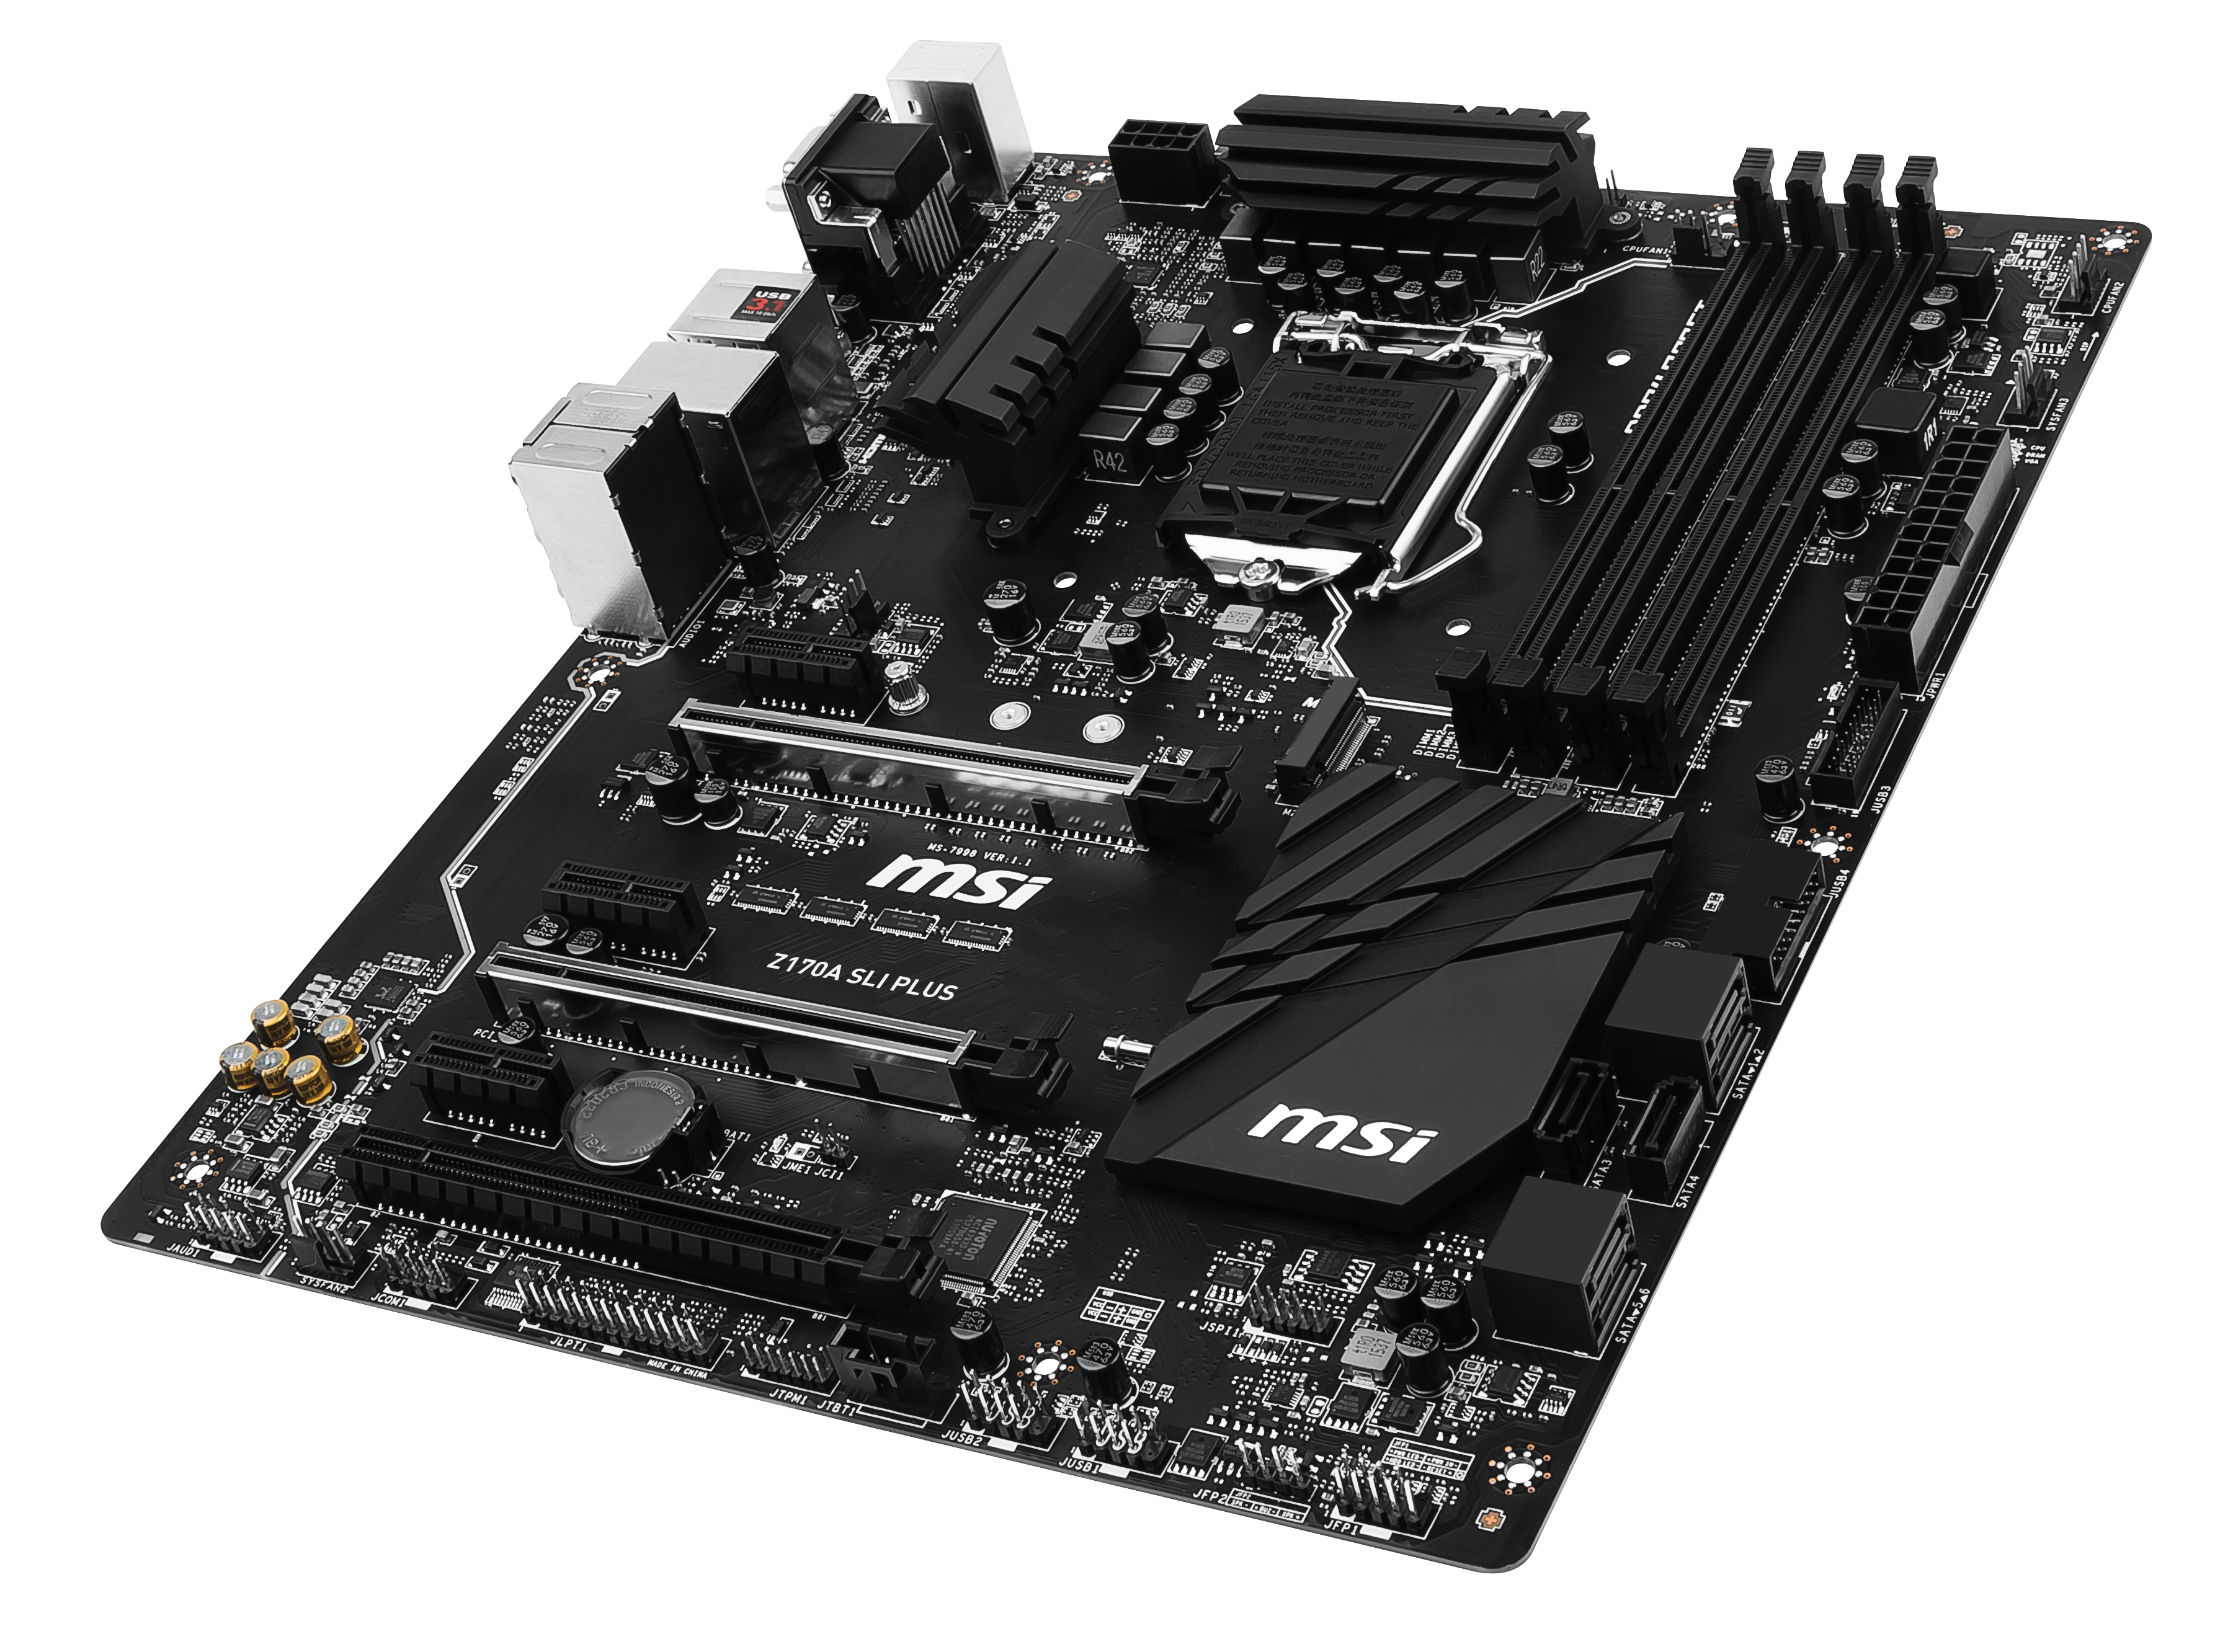 The Msi Z170a Sli Plus Review Redefining The Base Line At 130